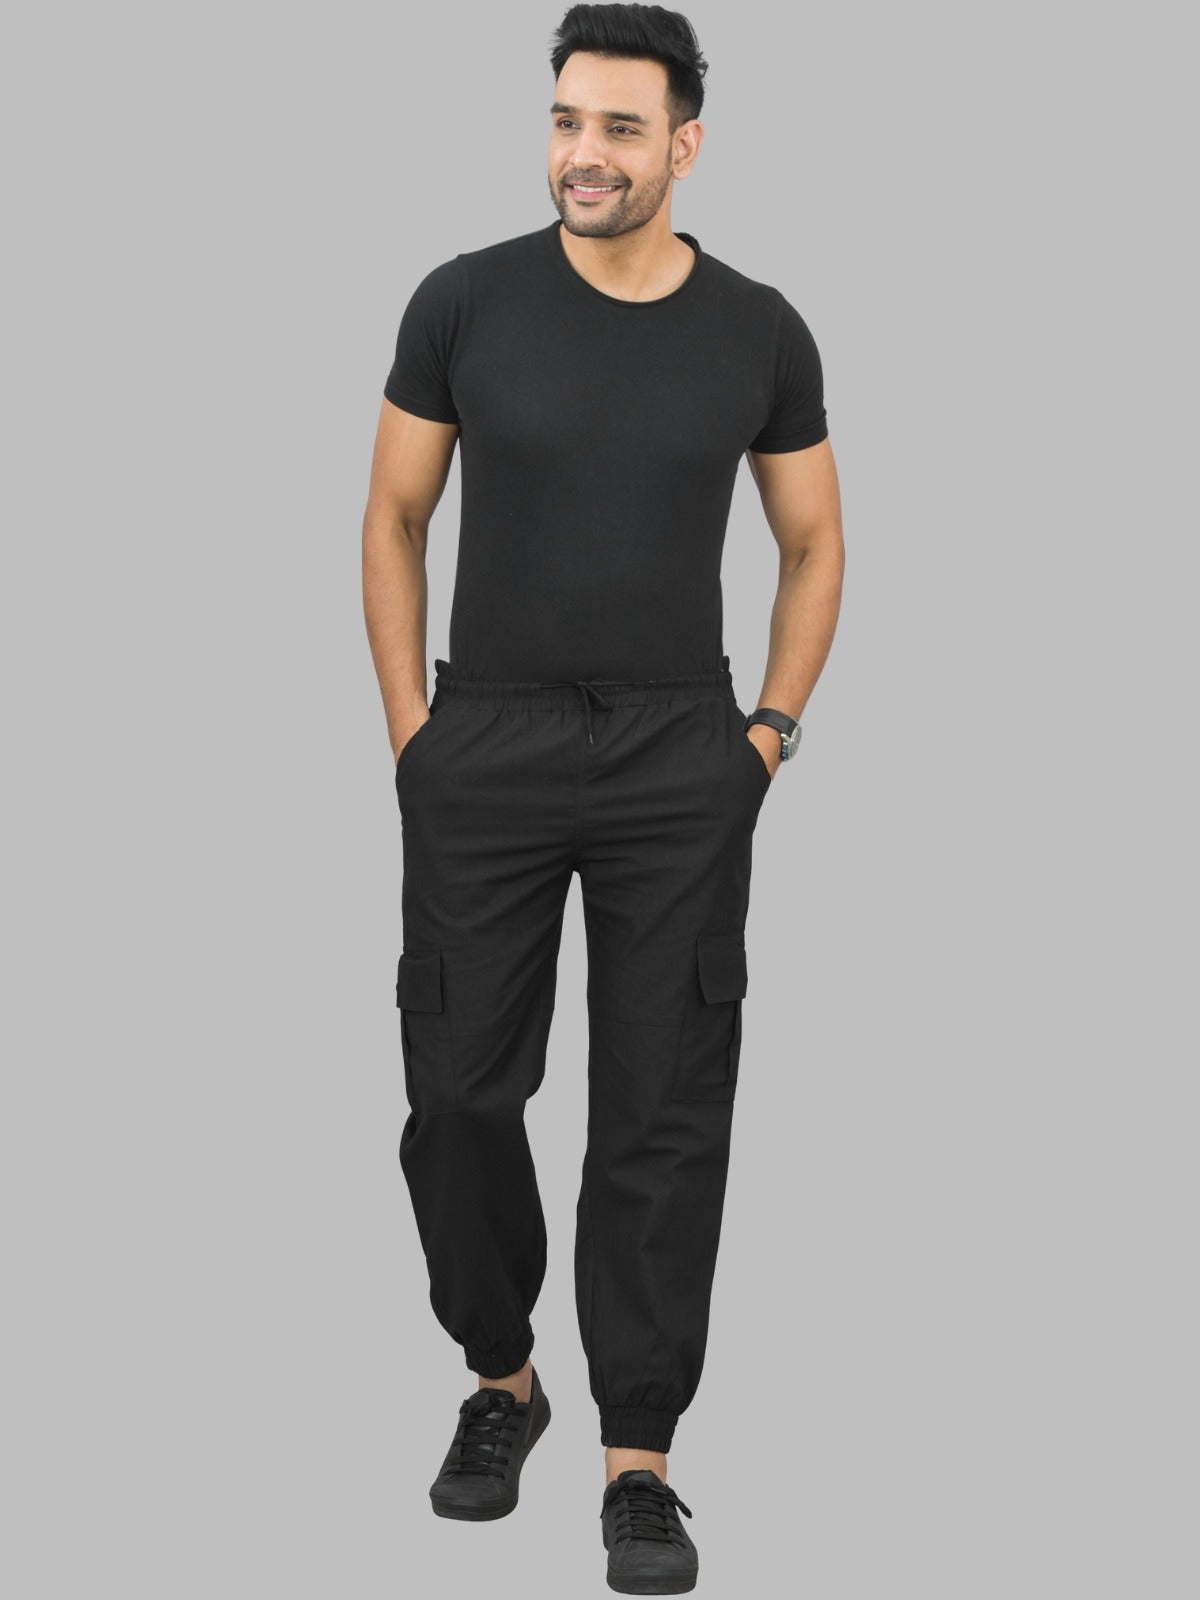 Combo Pack Of Mens Black And Navy Blue Five Pocket Cotton Cargo Pants